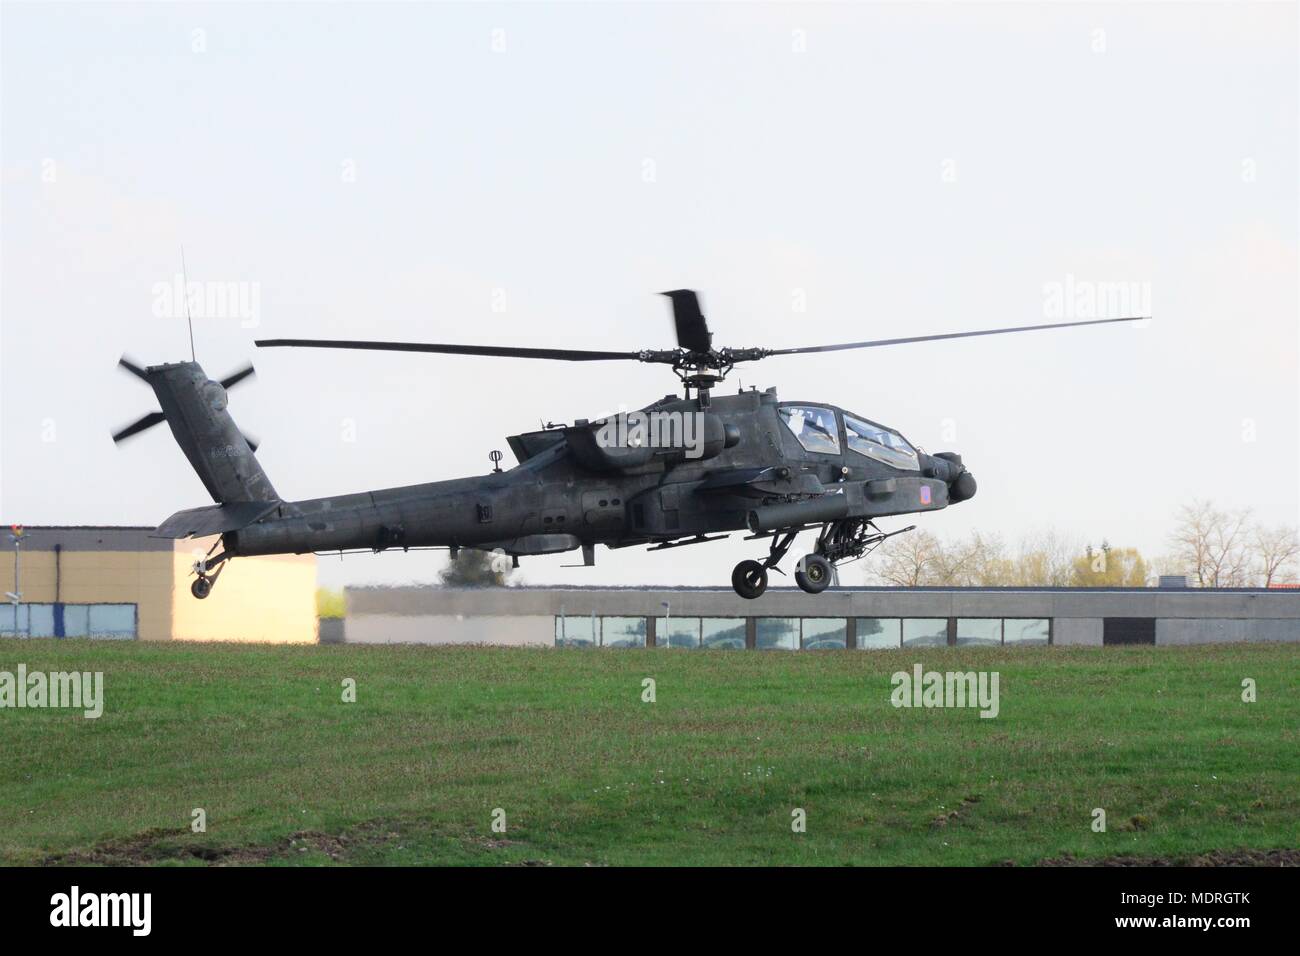 A U.S. Army AH-64 Apache helicopter from 1st Battalion, 3rd Aviation Regiment (Attack Reconnaissance) conducts a traffic pattern training flight April 17, 2018, at Katterbach Army Airfield in Ansbach, Bavaria, Germany. During traffic pattern training flights, pilots perform multiple important maneuvers and tasks, including taking off, making coordinated turns, managing airspeed and landing. (U.S. Army photo by Charles Rosemond) Stock Photo